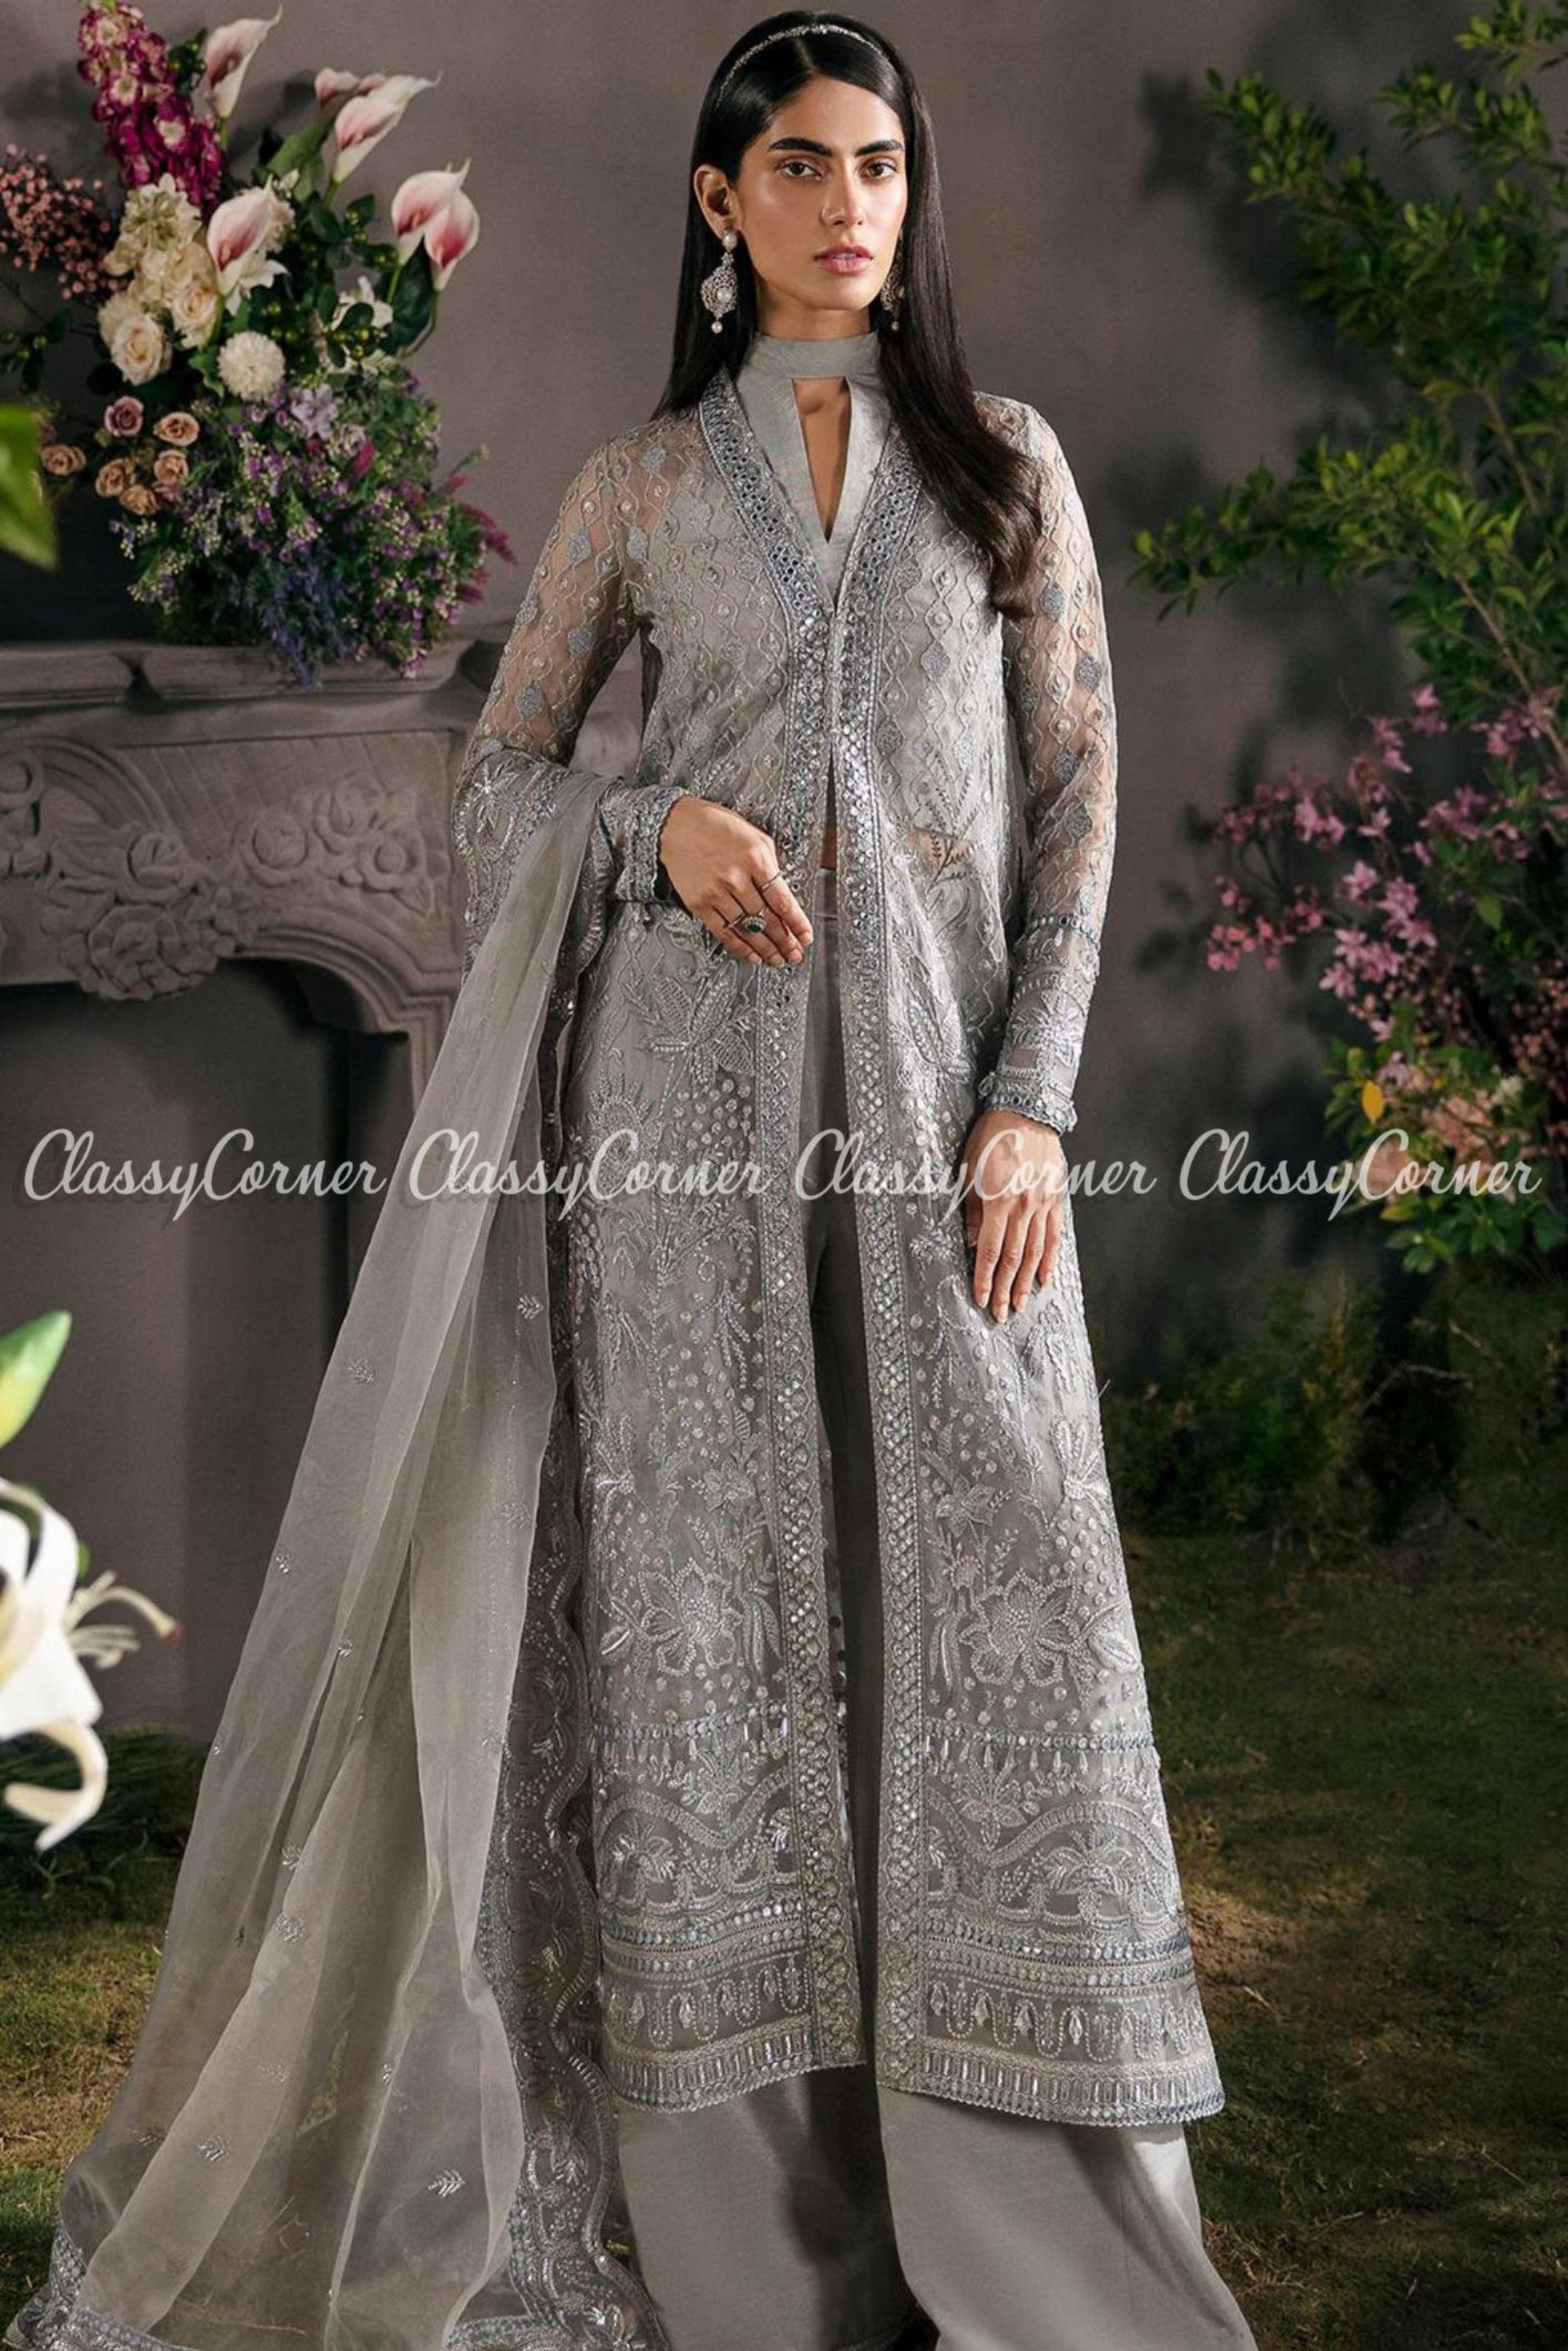 readymade gown style suit in india -pf76666341 | Heenastyle